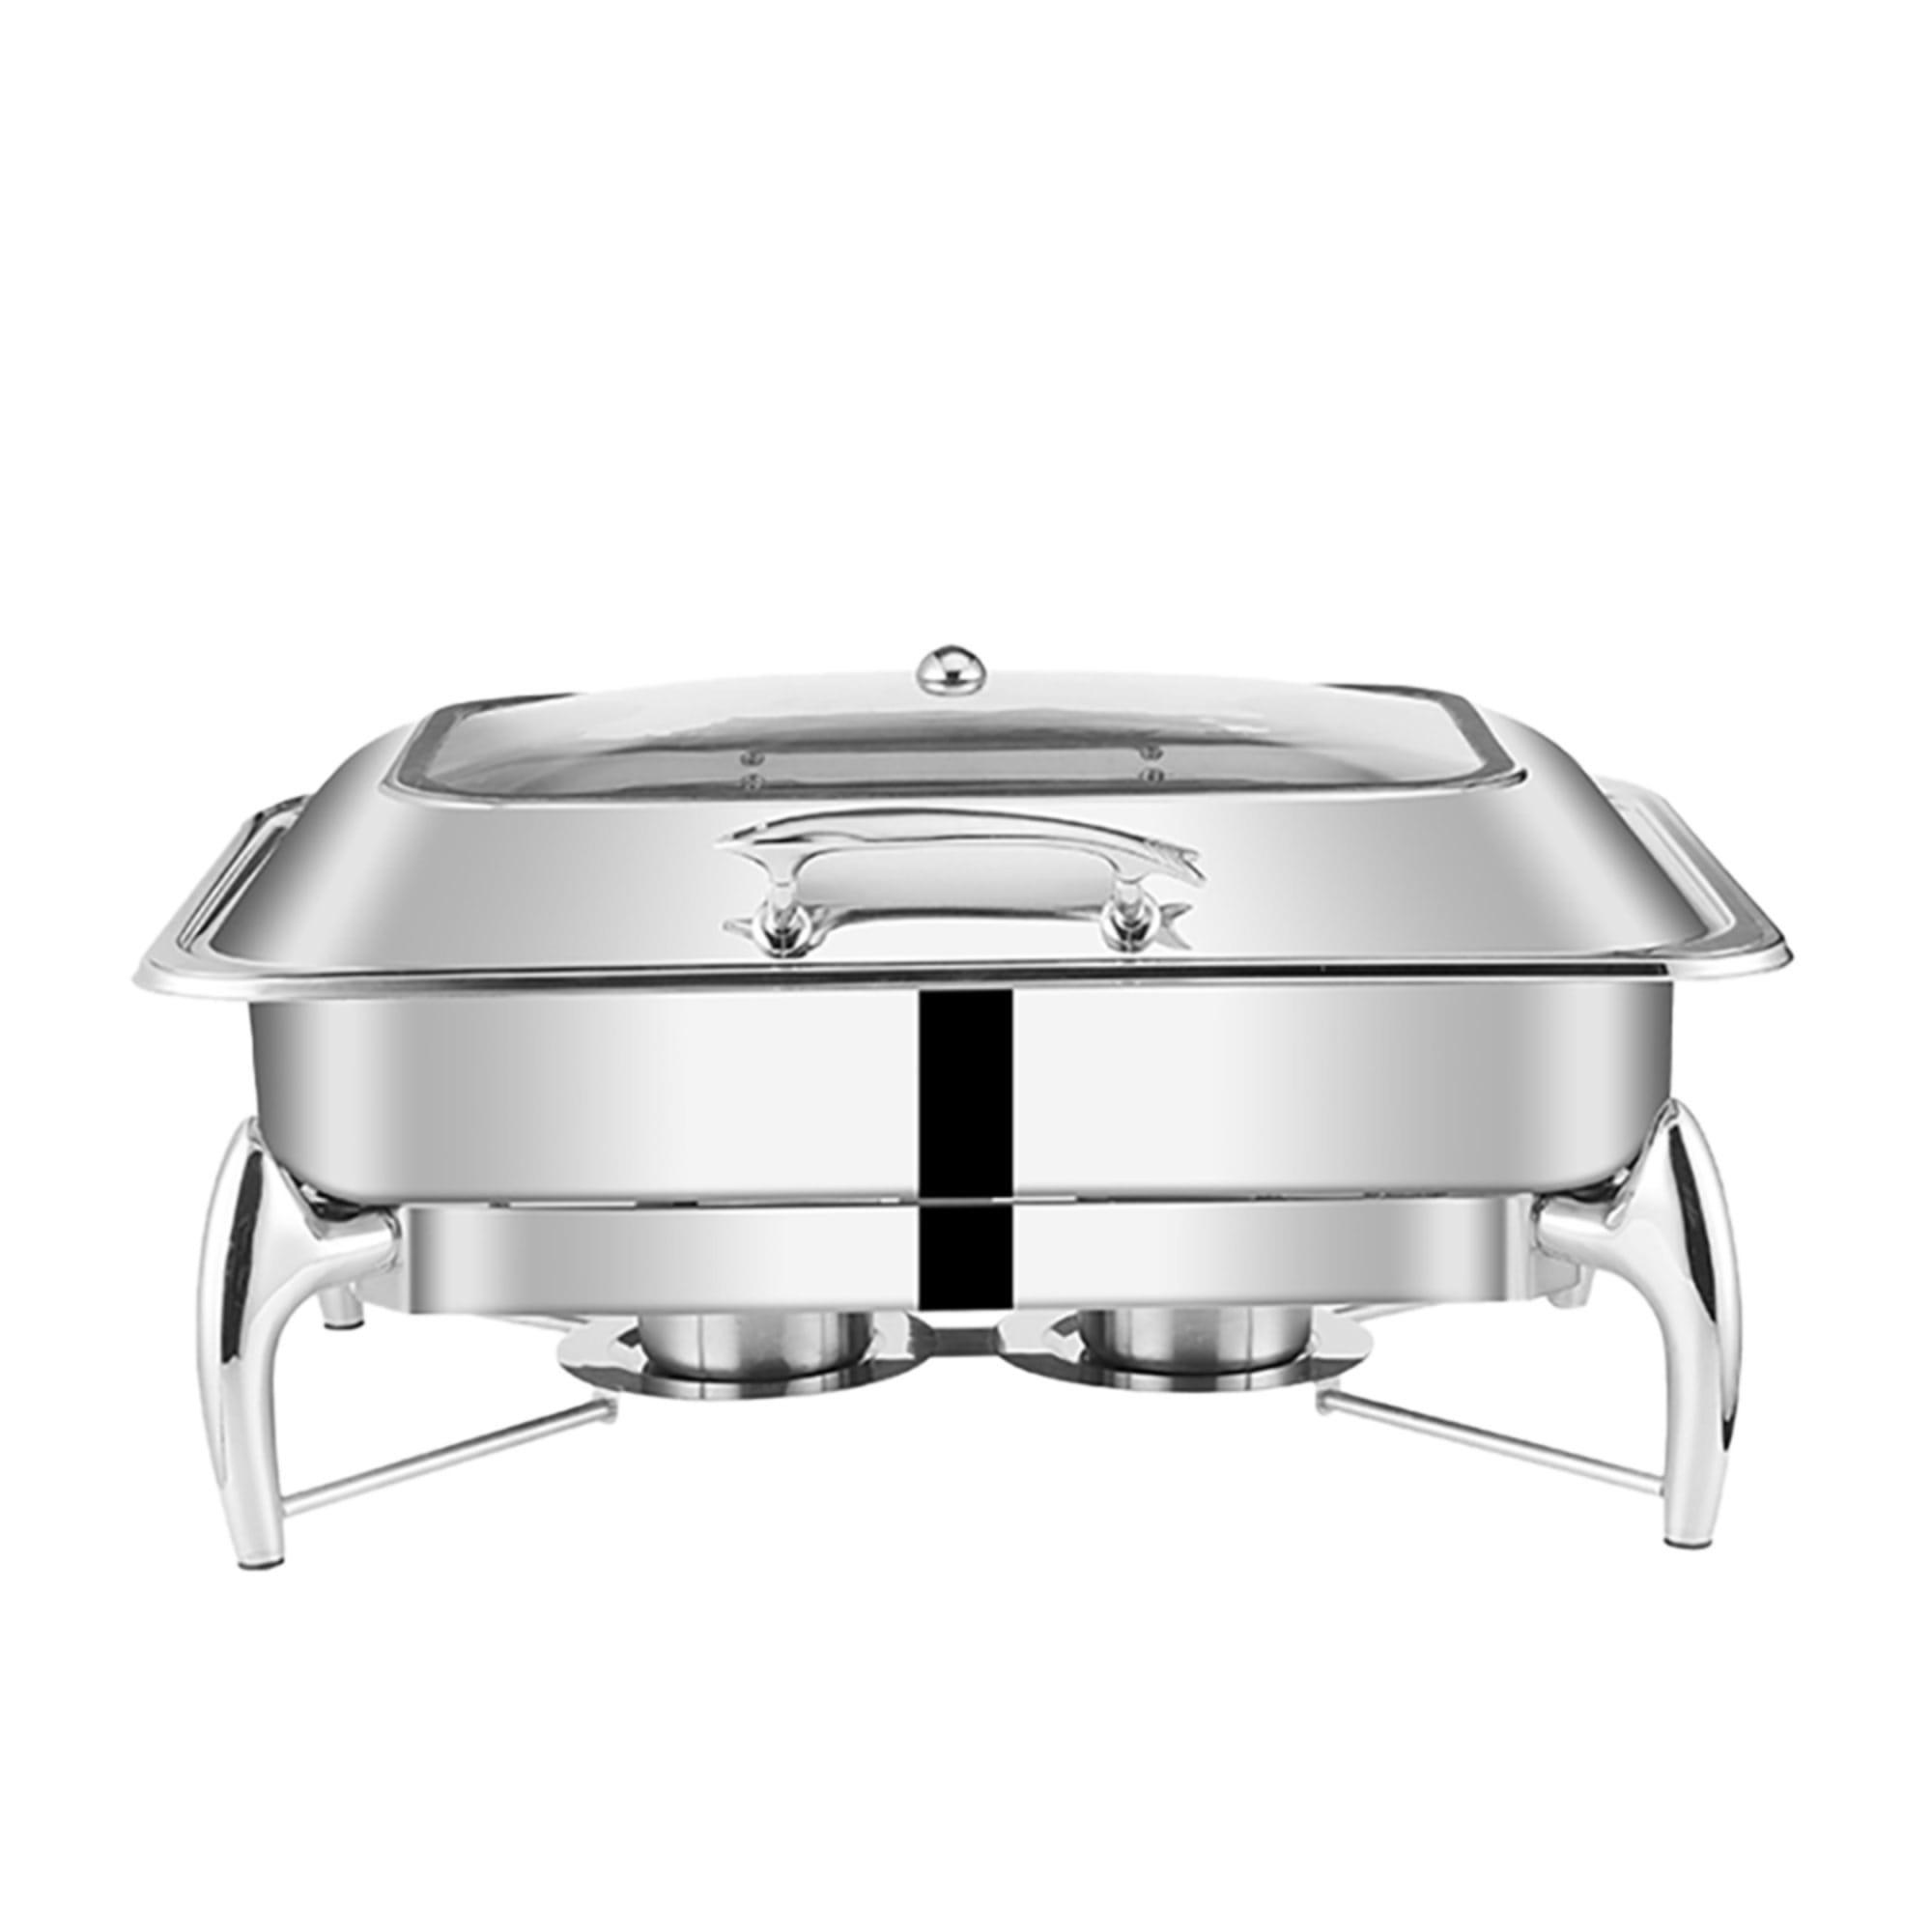 Soga Rectangular Stainless Steel Chafing Dish with Top Lid Image 1